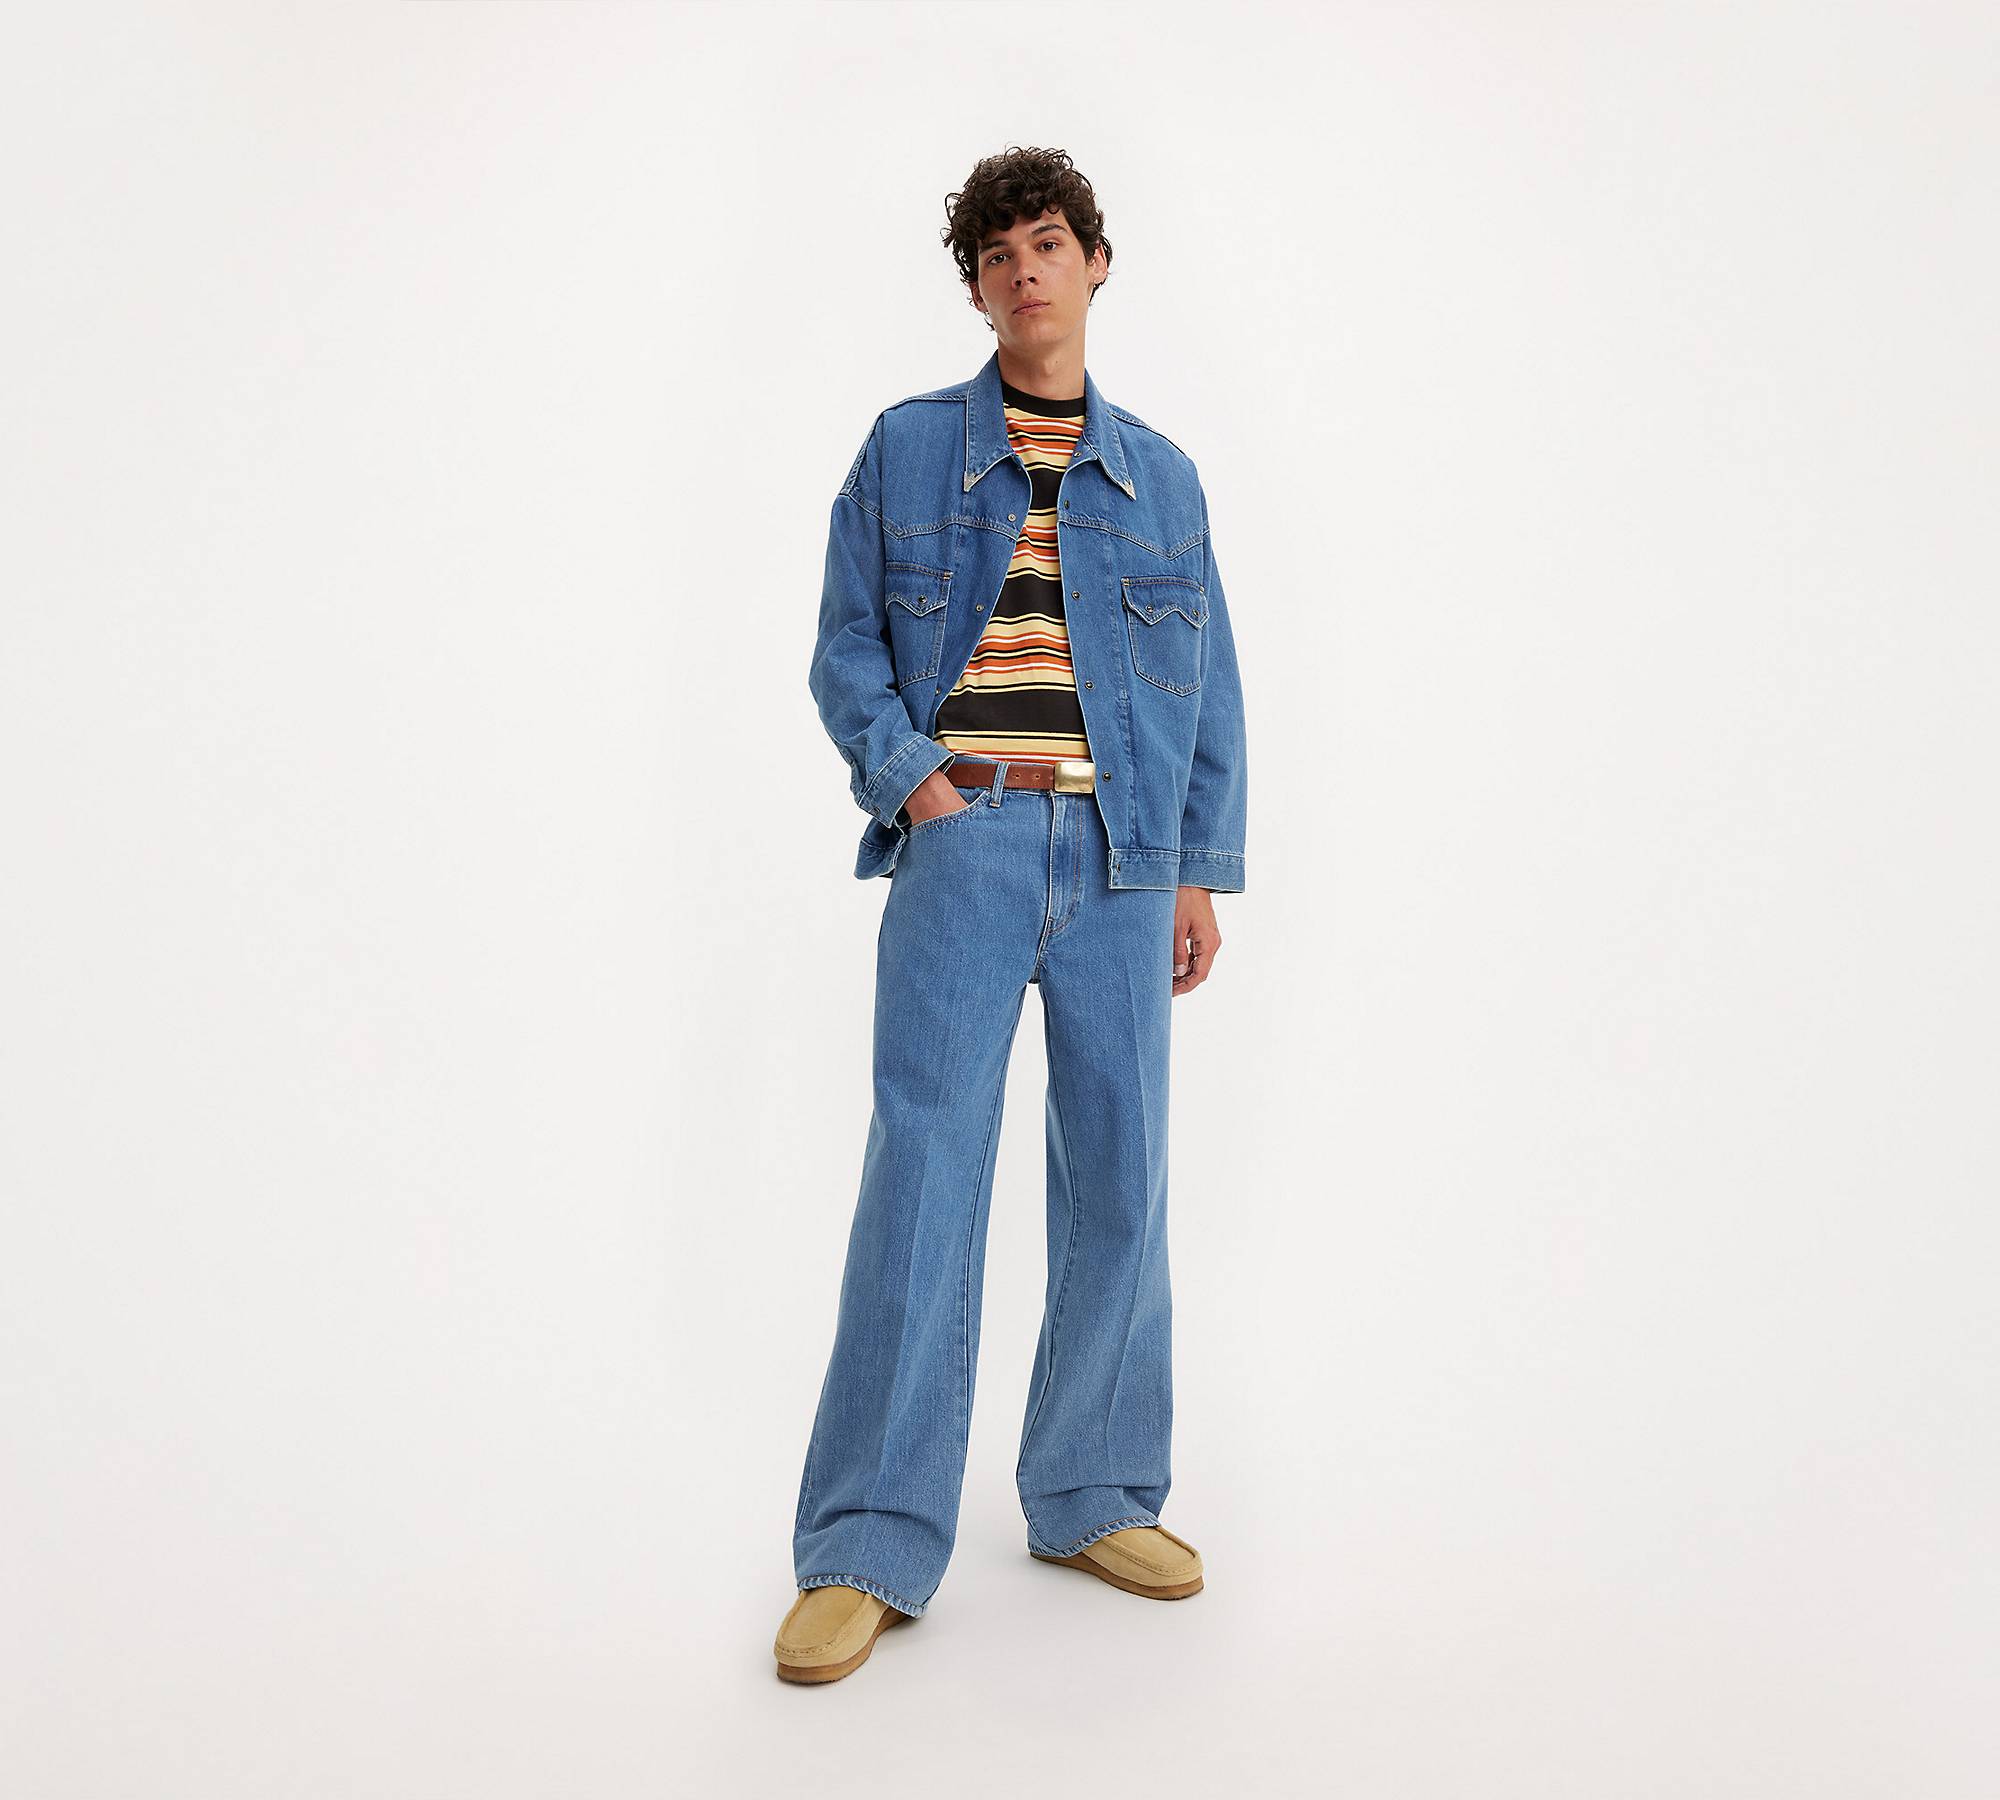 Big And Tall Bell Bottom Jeans on Sale | bellvalefarms.com